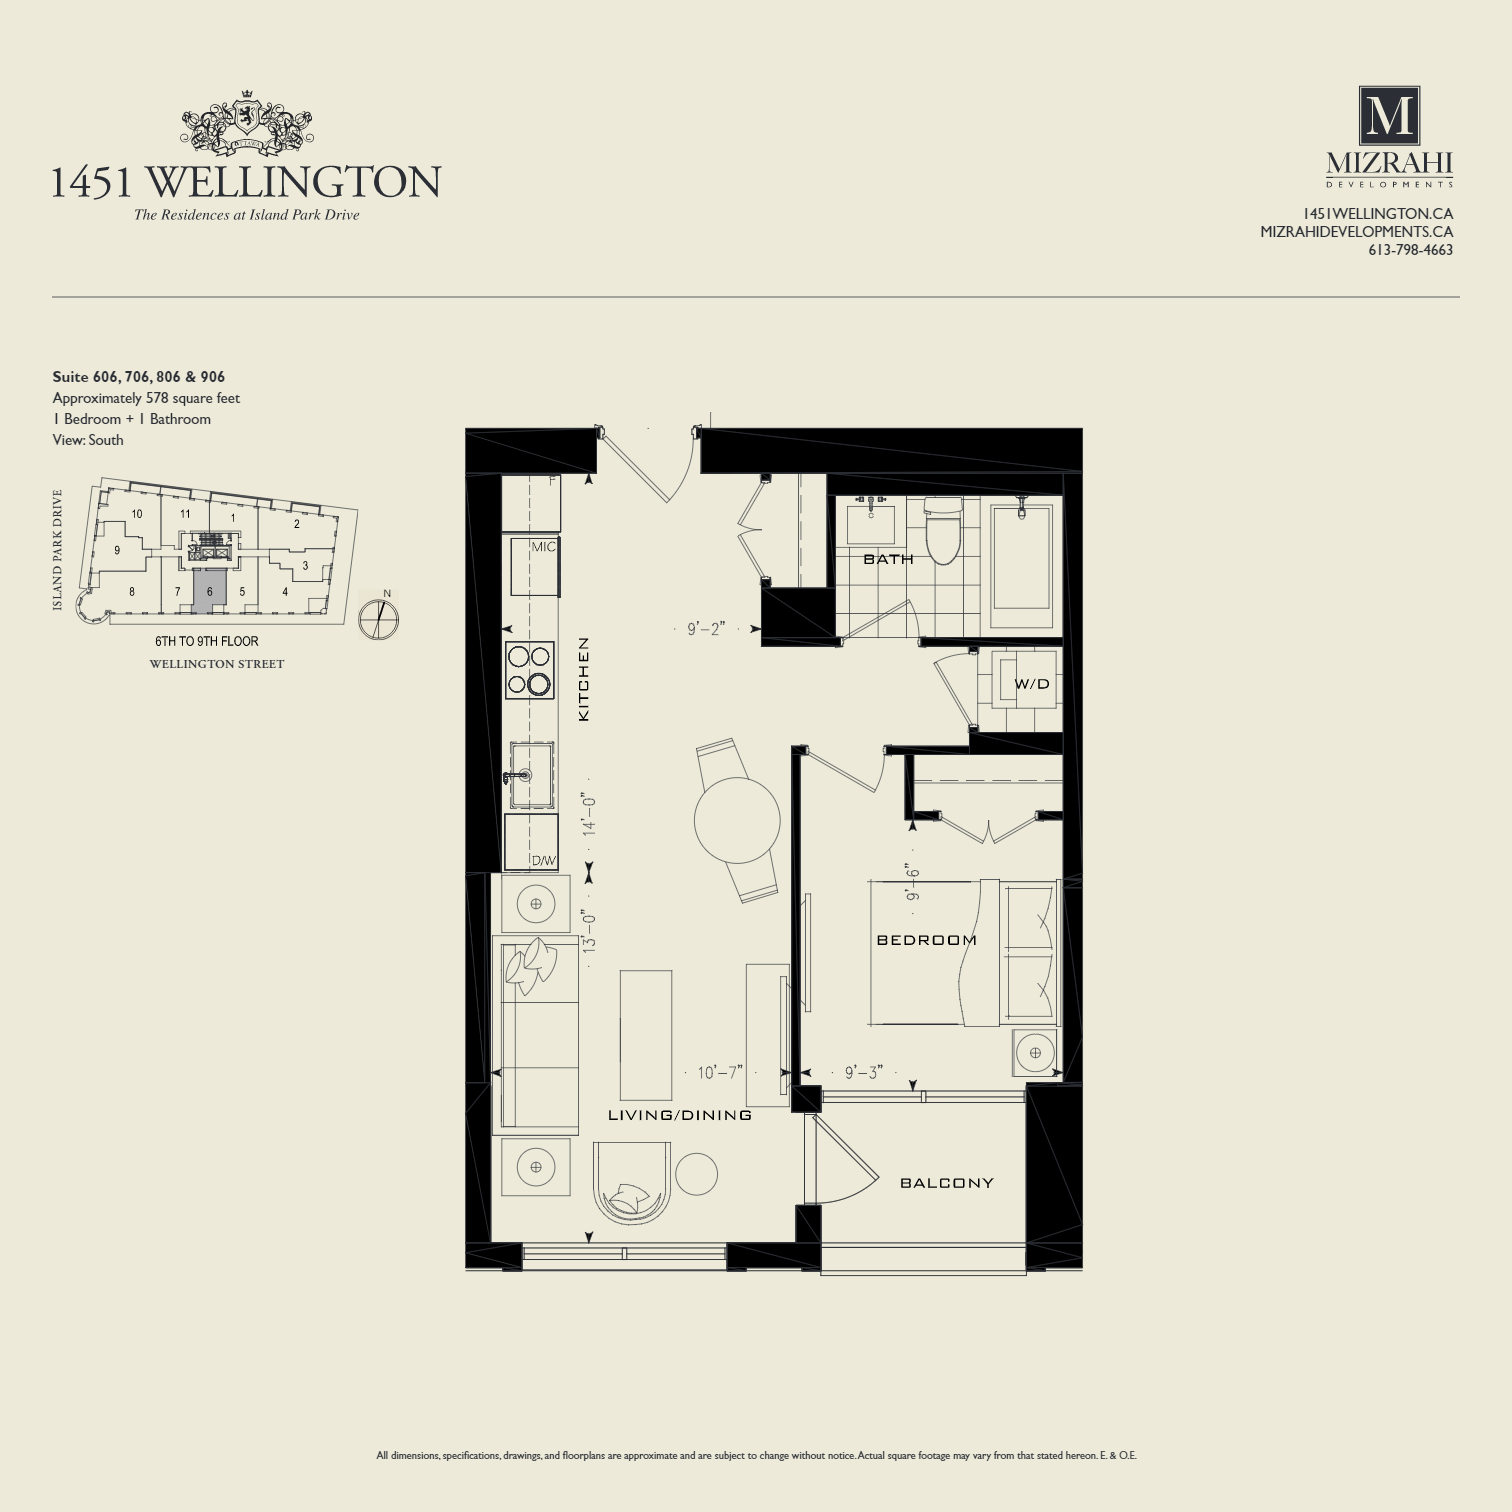 578 sq ft Floor Plan of The Residences at Island Park Drive Condos with undefined beds